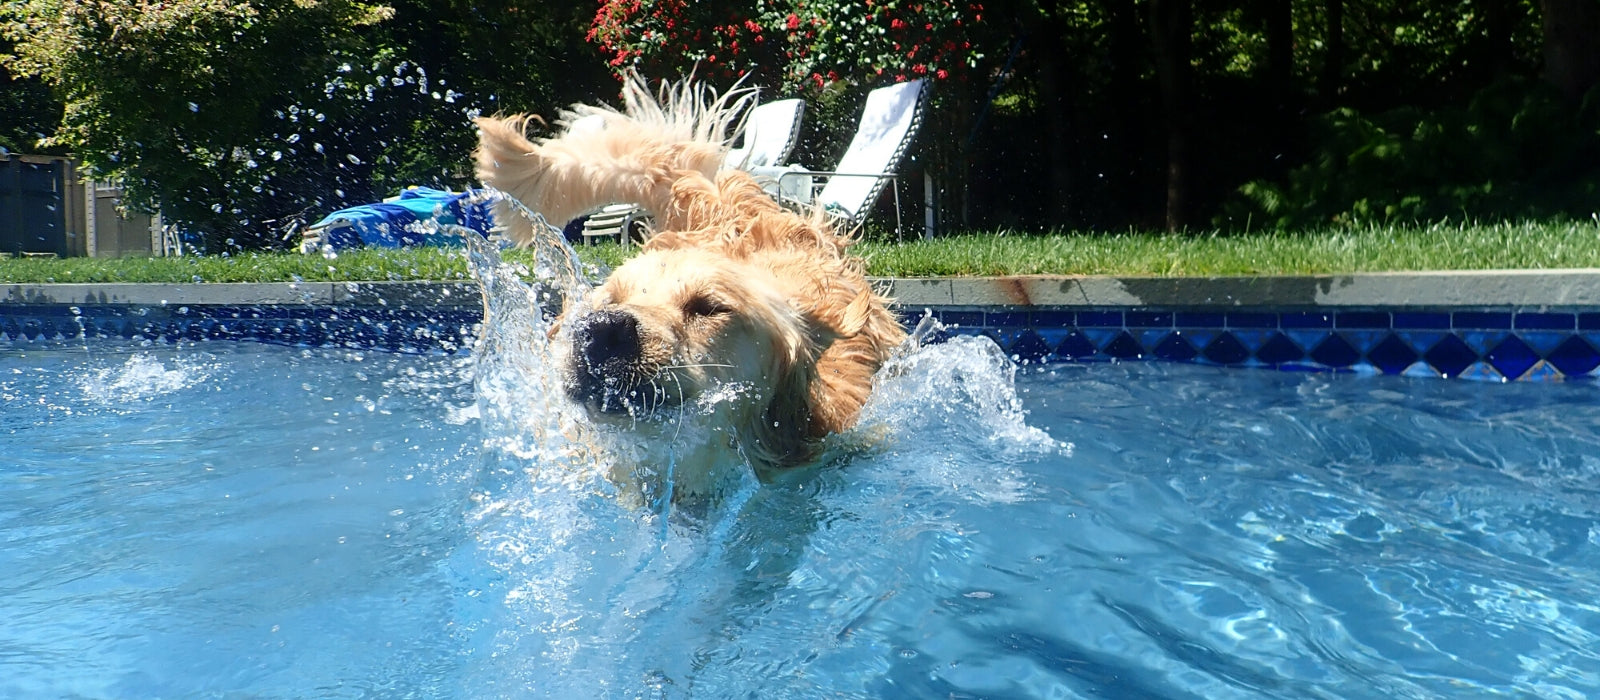 Cool Pet Tips for the Dog Days of Summer